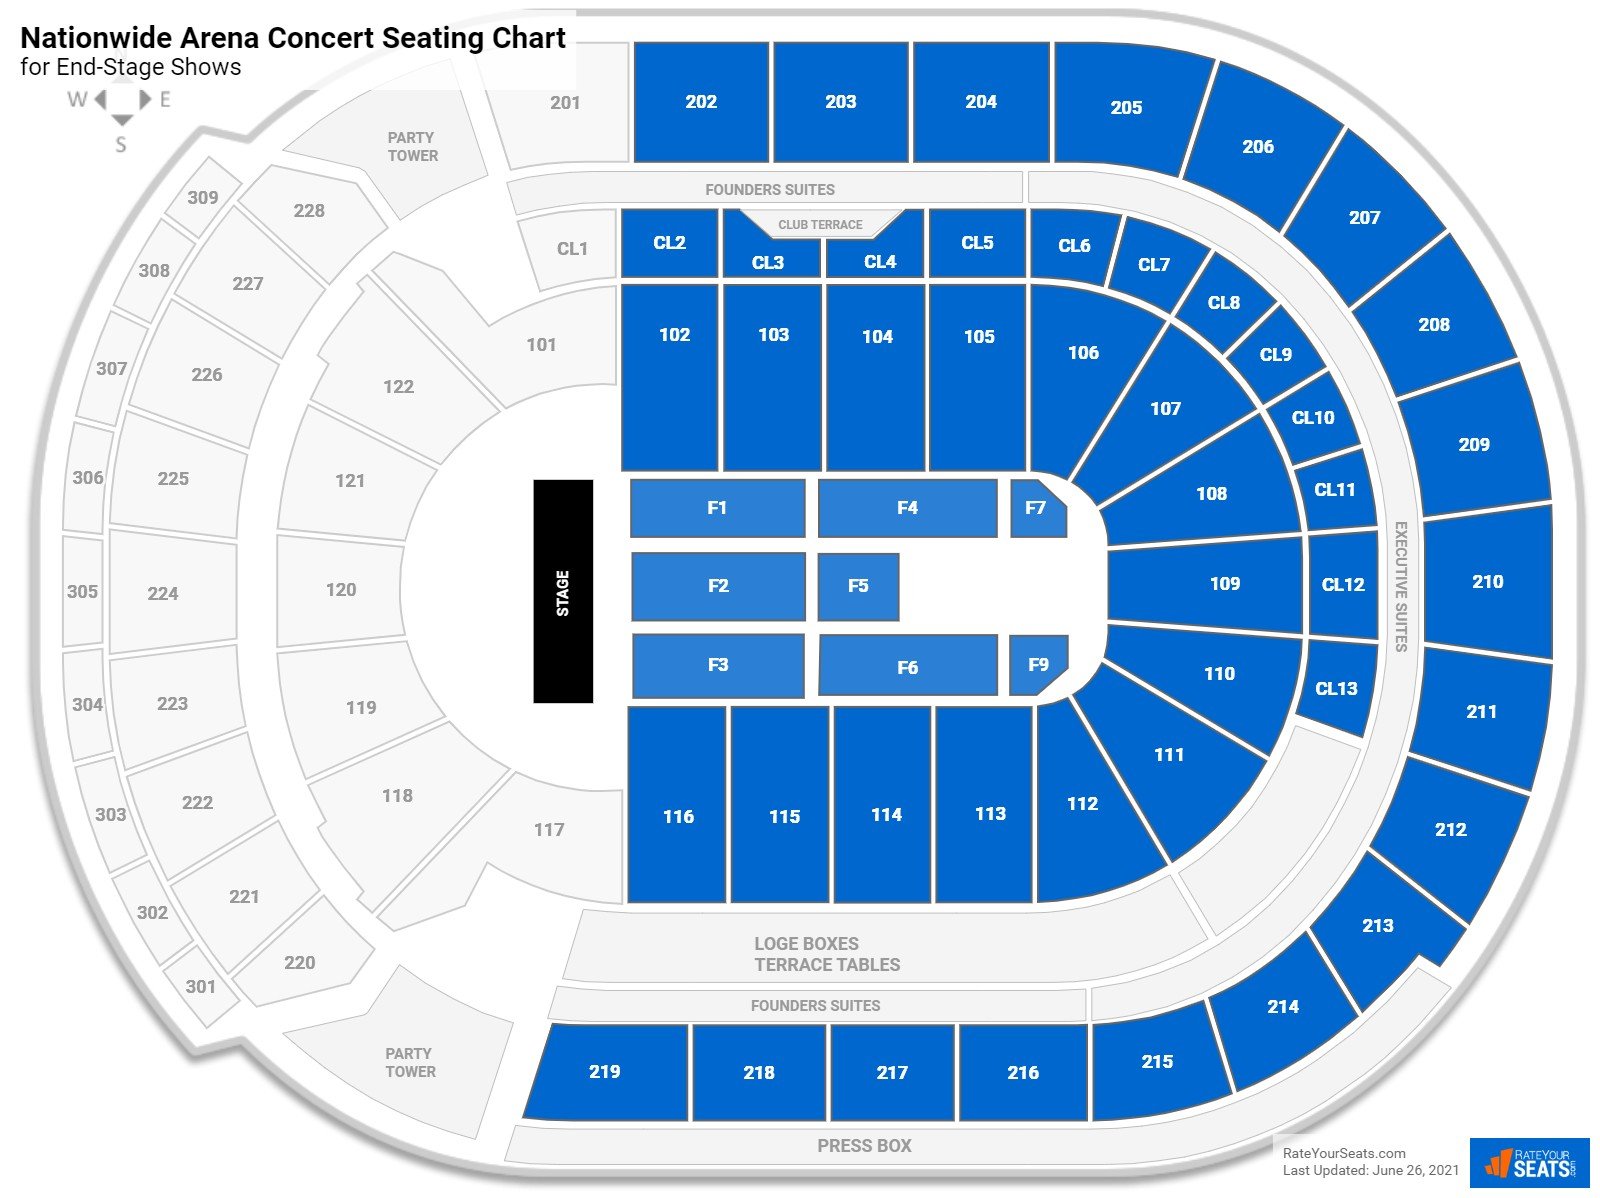 Nationwide Arena Seating Chart for Concerts